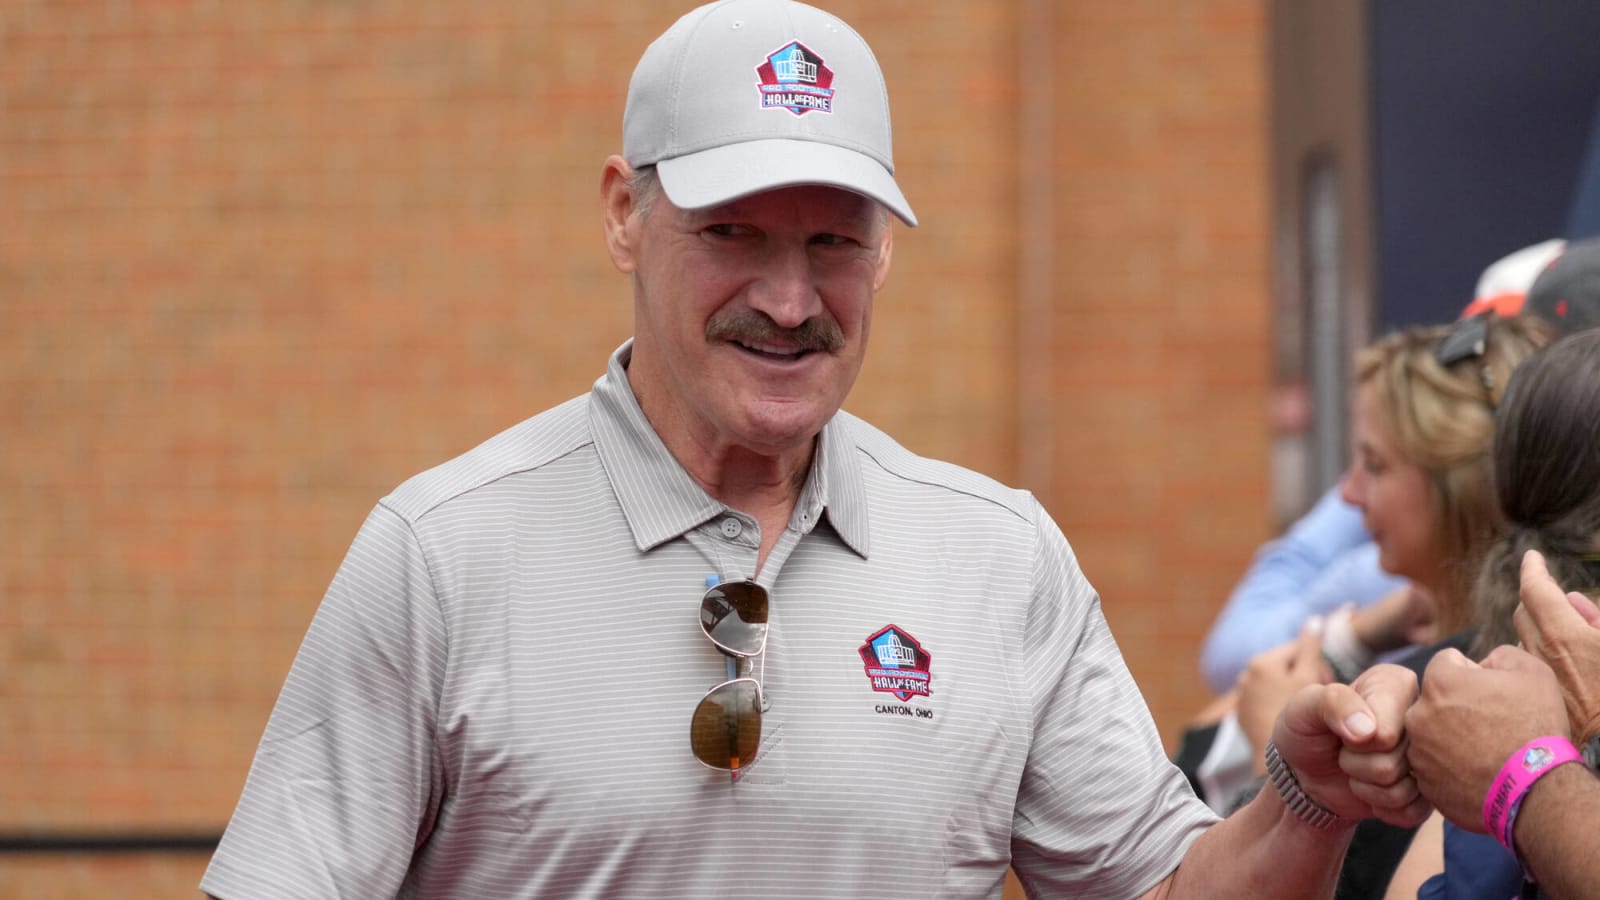 Steelers Legend Bill Cowher Shares How Being Rejected Gave Him The Fight Needed To Succeed With The Help Of A College Coaching Legend